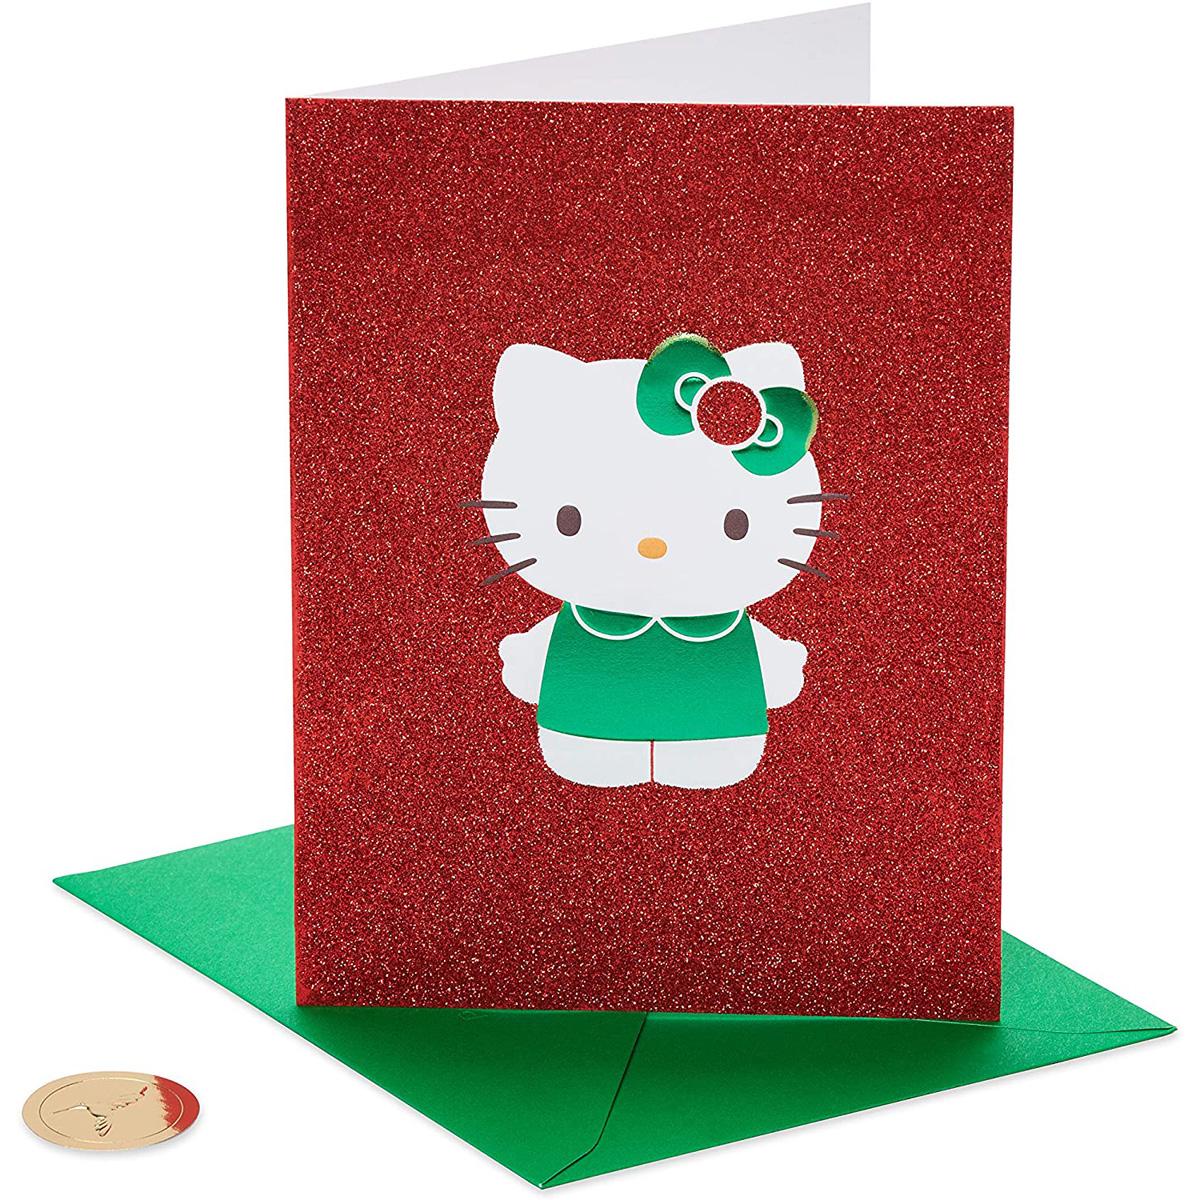 Papyrus Christmas Cards Box for $4.35